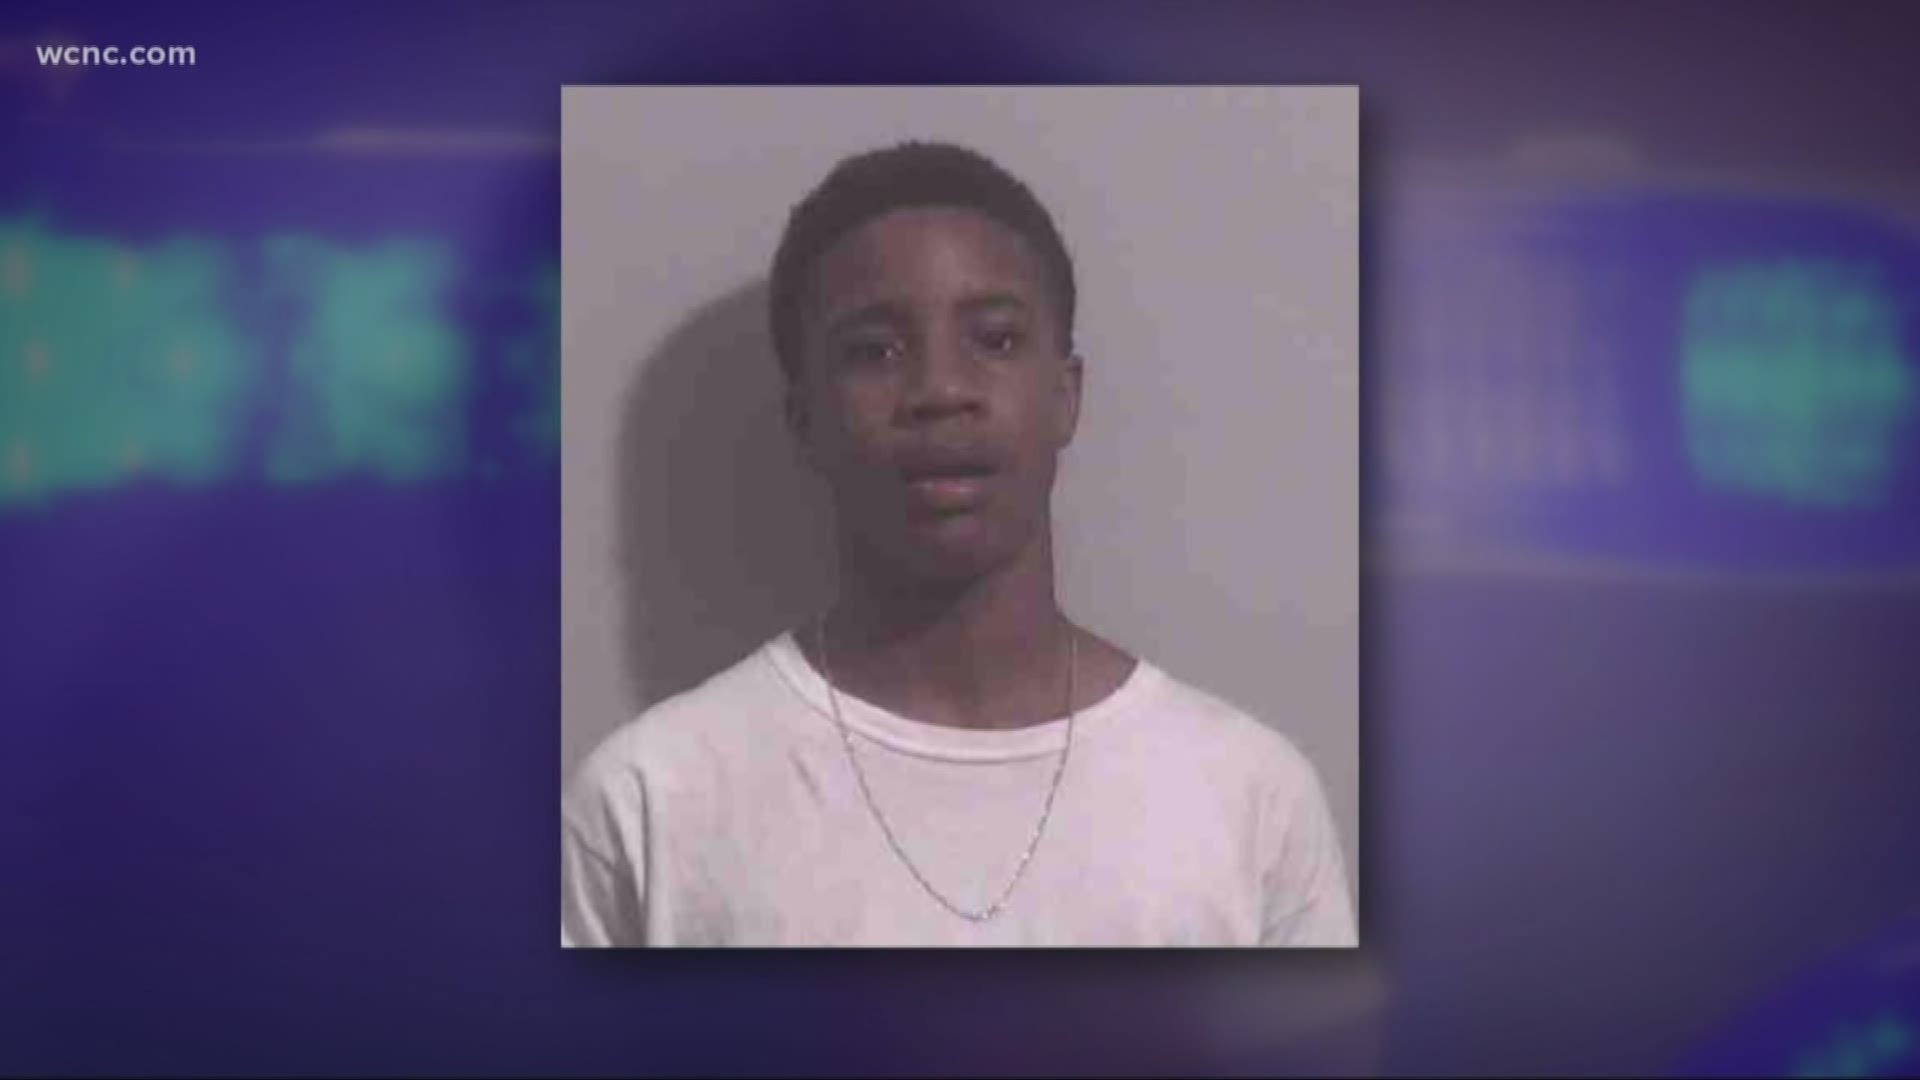 Police say the 16-year-old should be considered and dangerous. A warrant is out for his arrest on a first-degree murder charge.